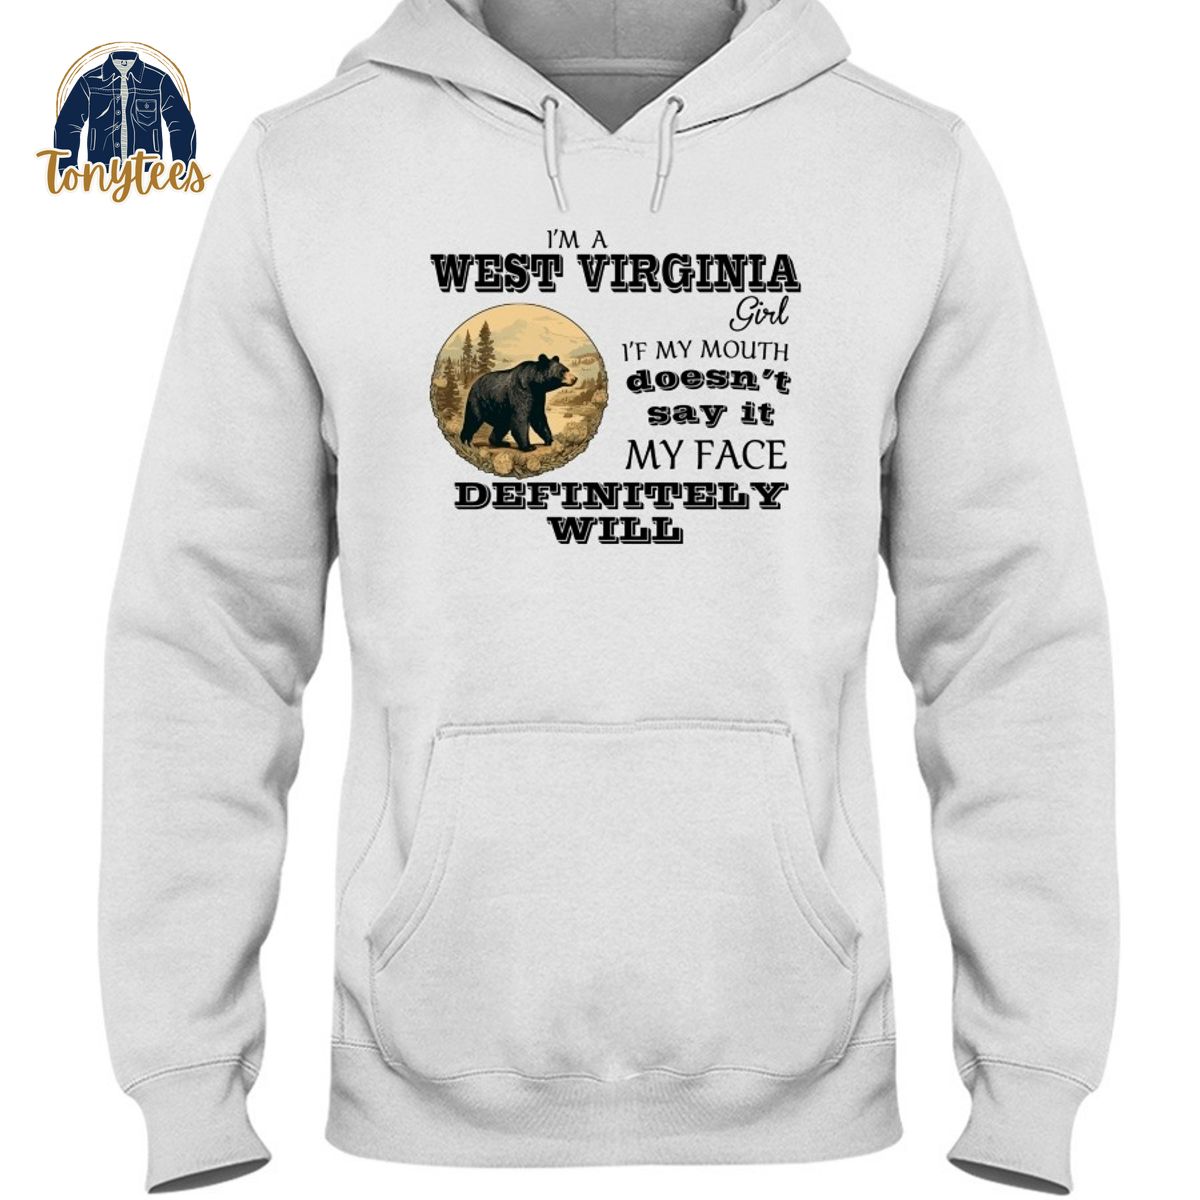 I am a West Virginia girl if my mouth doesn’t say it my face definitely will shirt